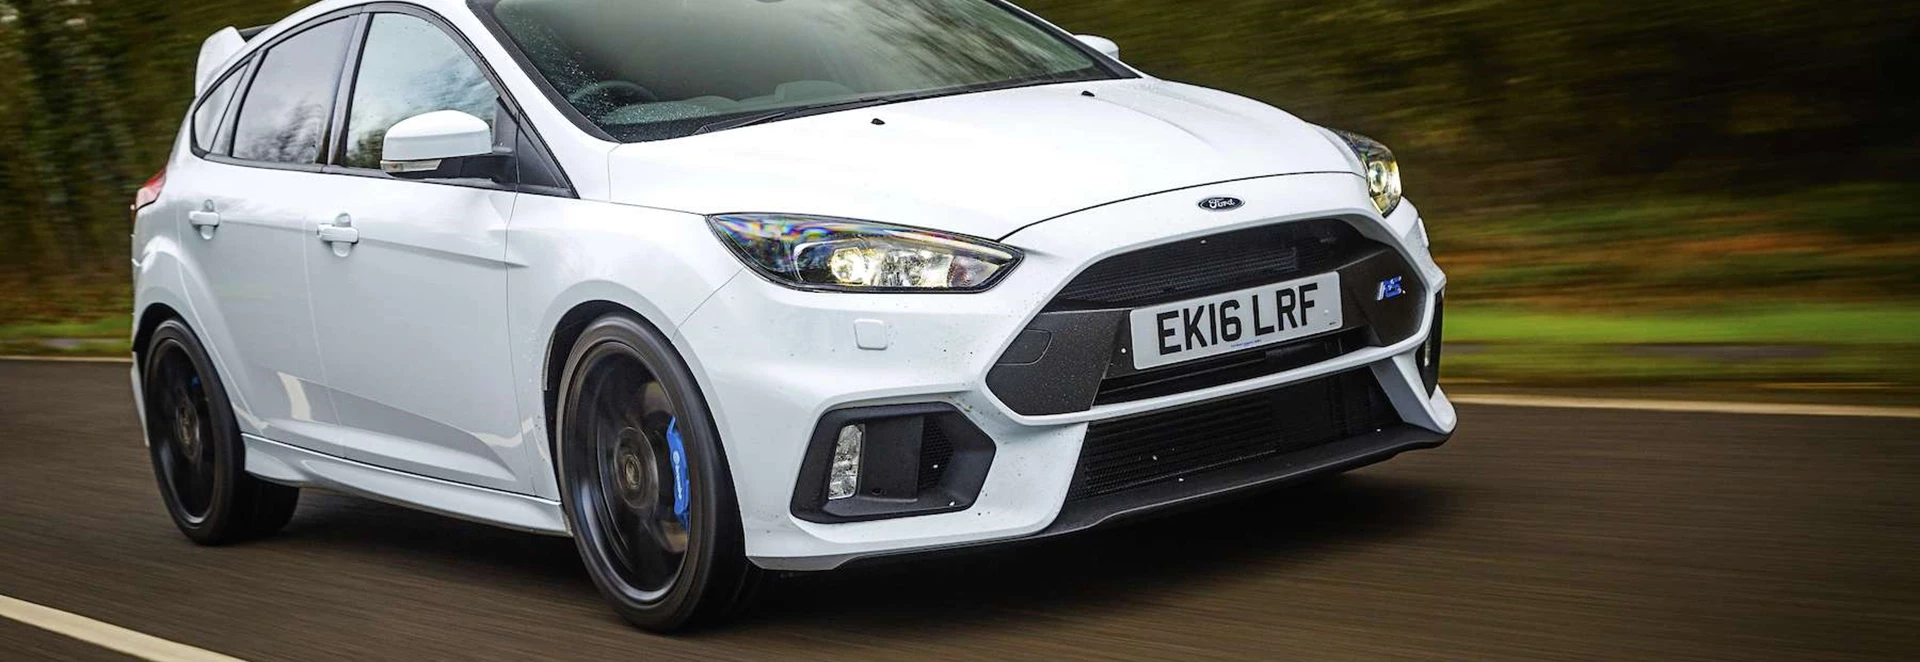 No new Focus RS is on the way, says Ford 